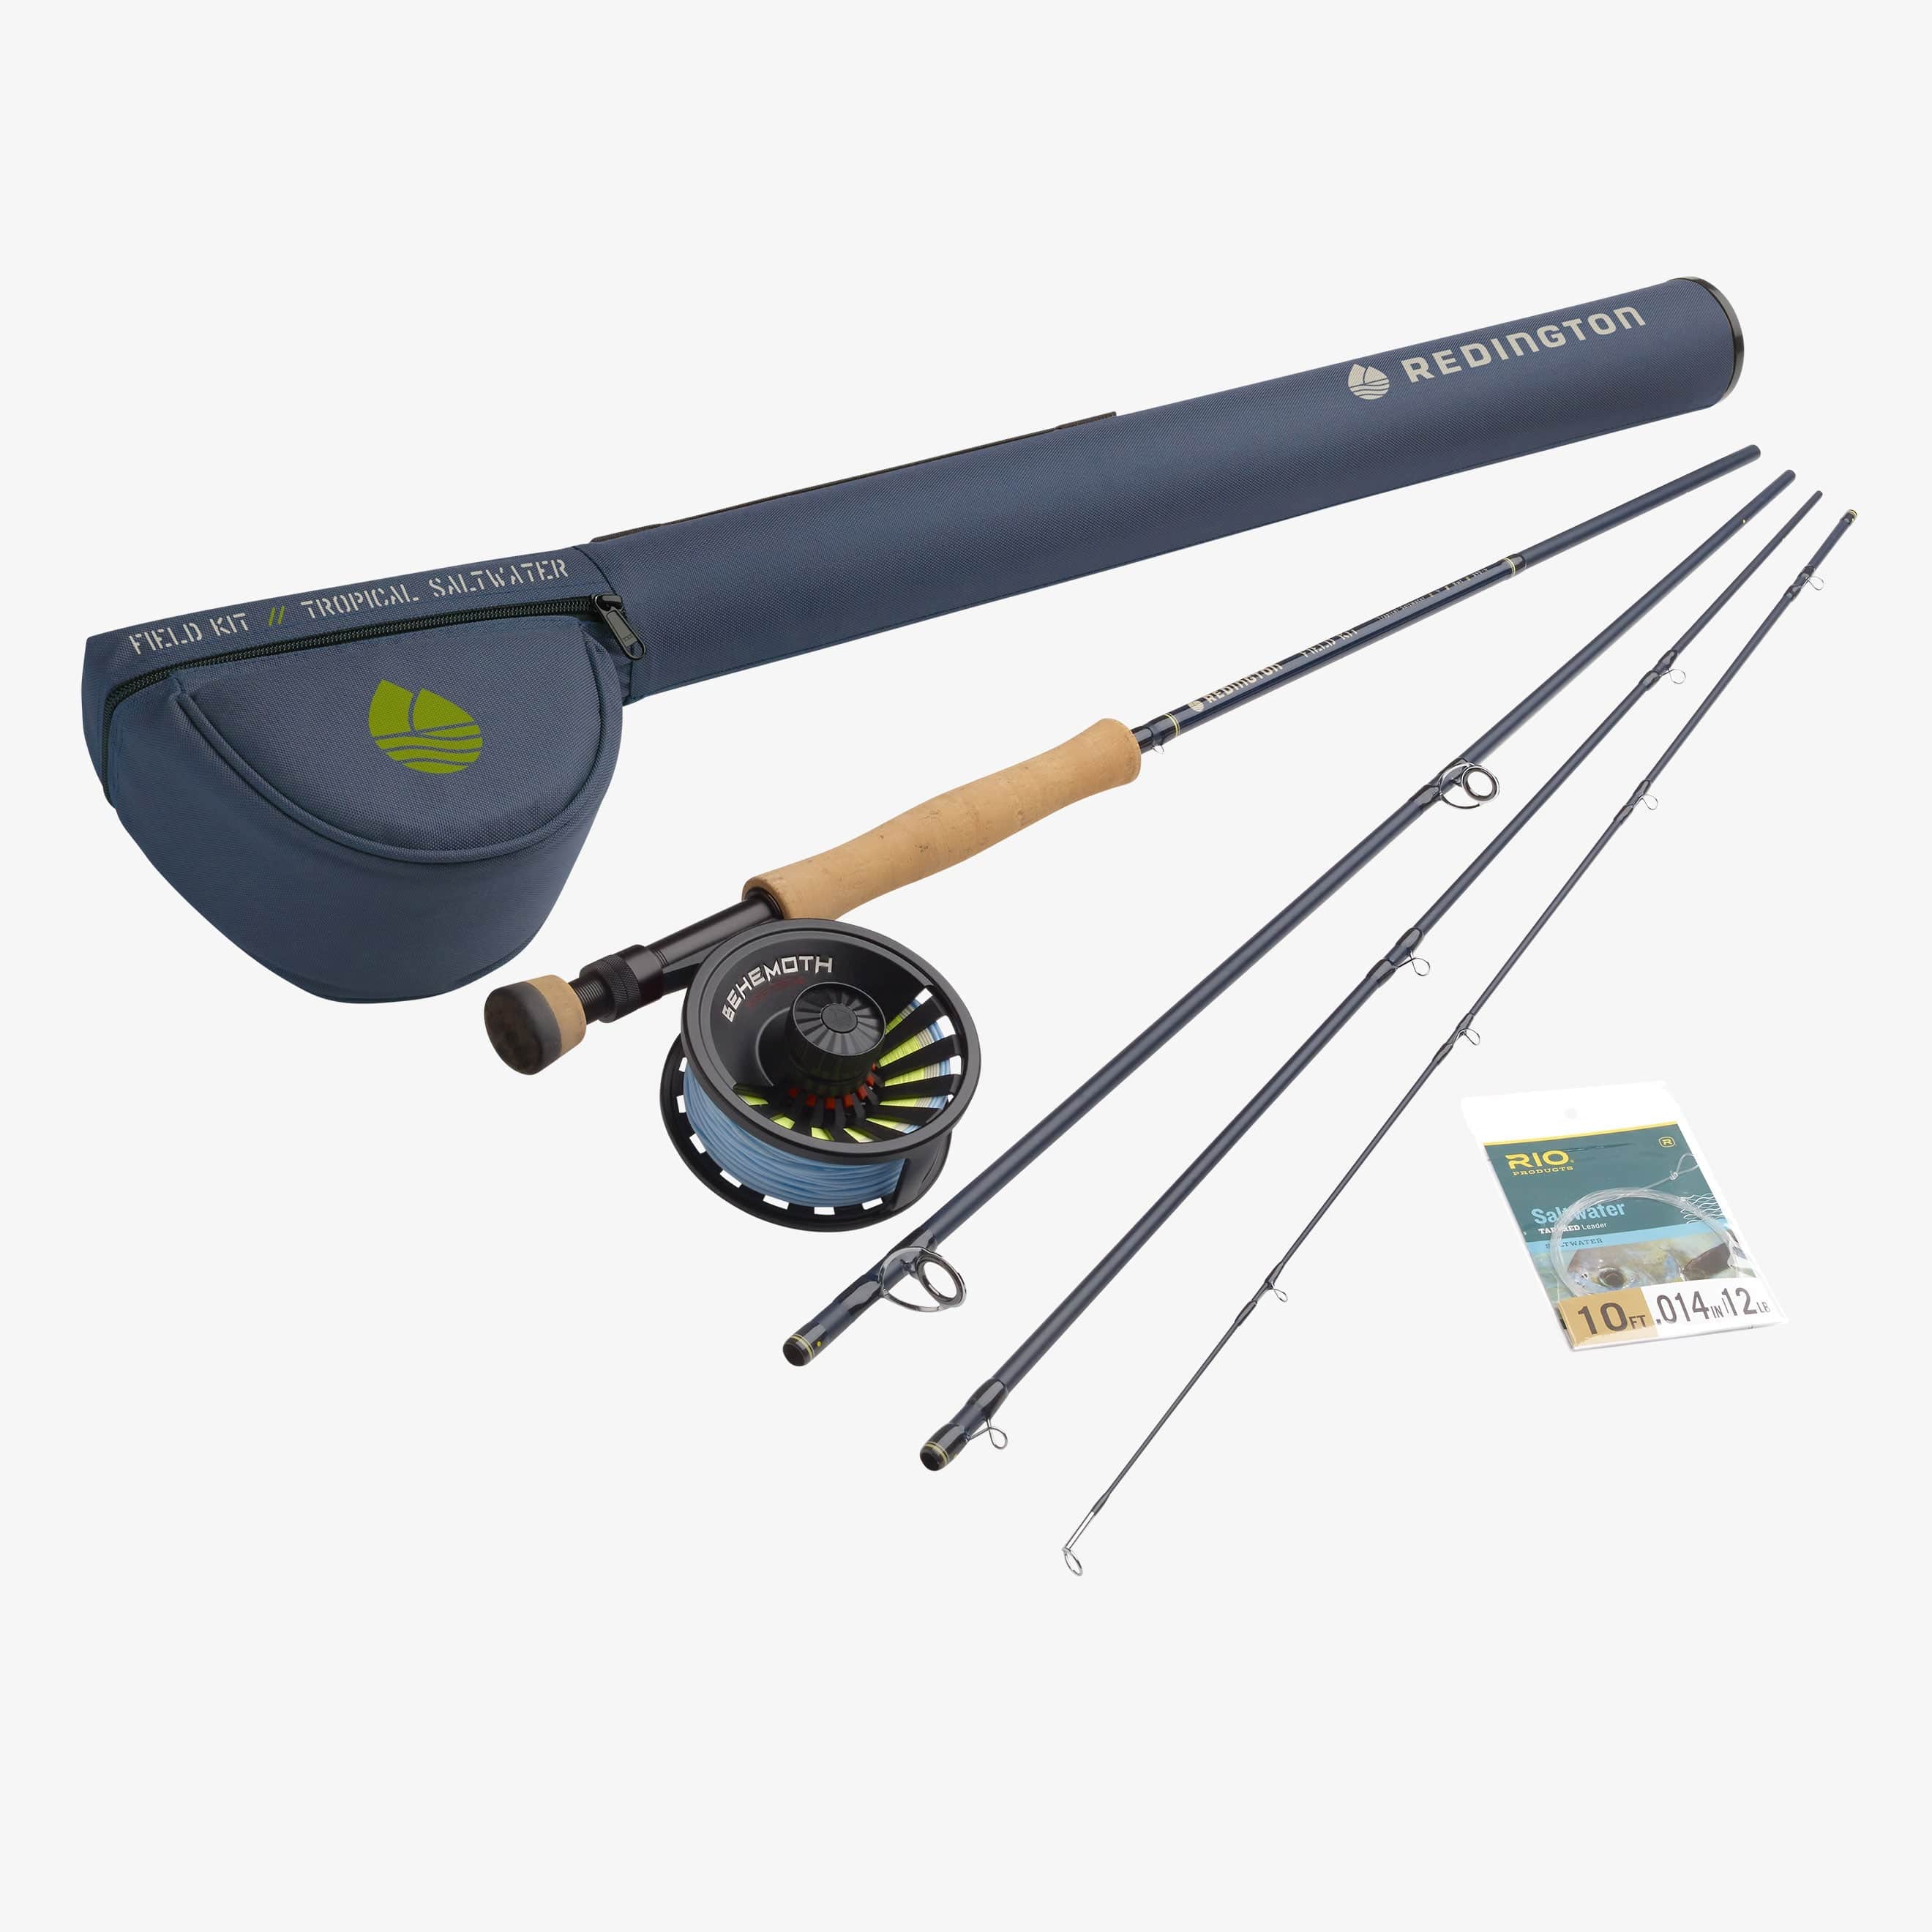 Redington Field Kit - Tropical Saltwater Fly Combo 8wt - The